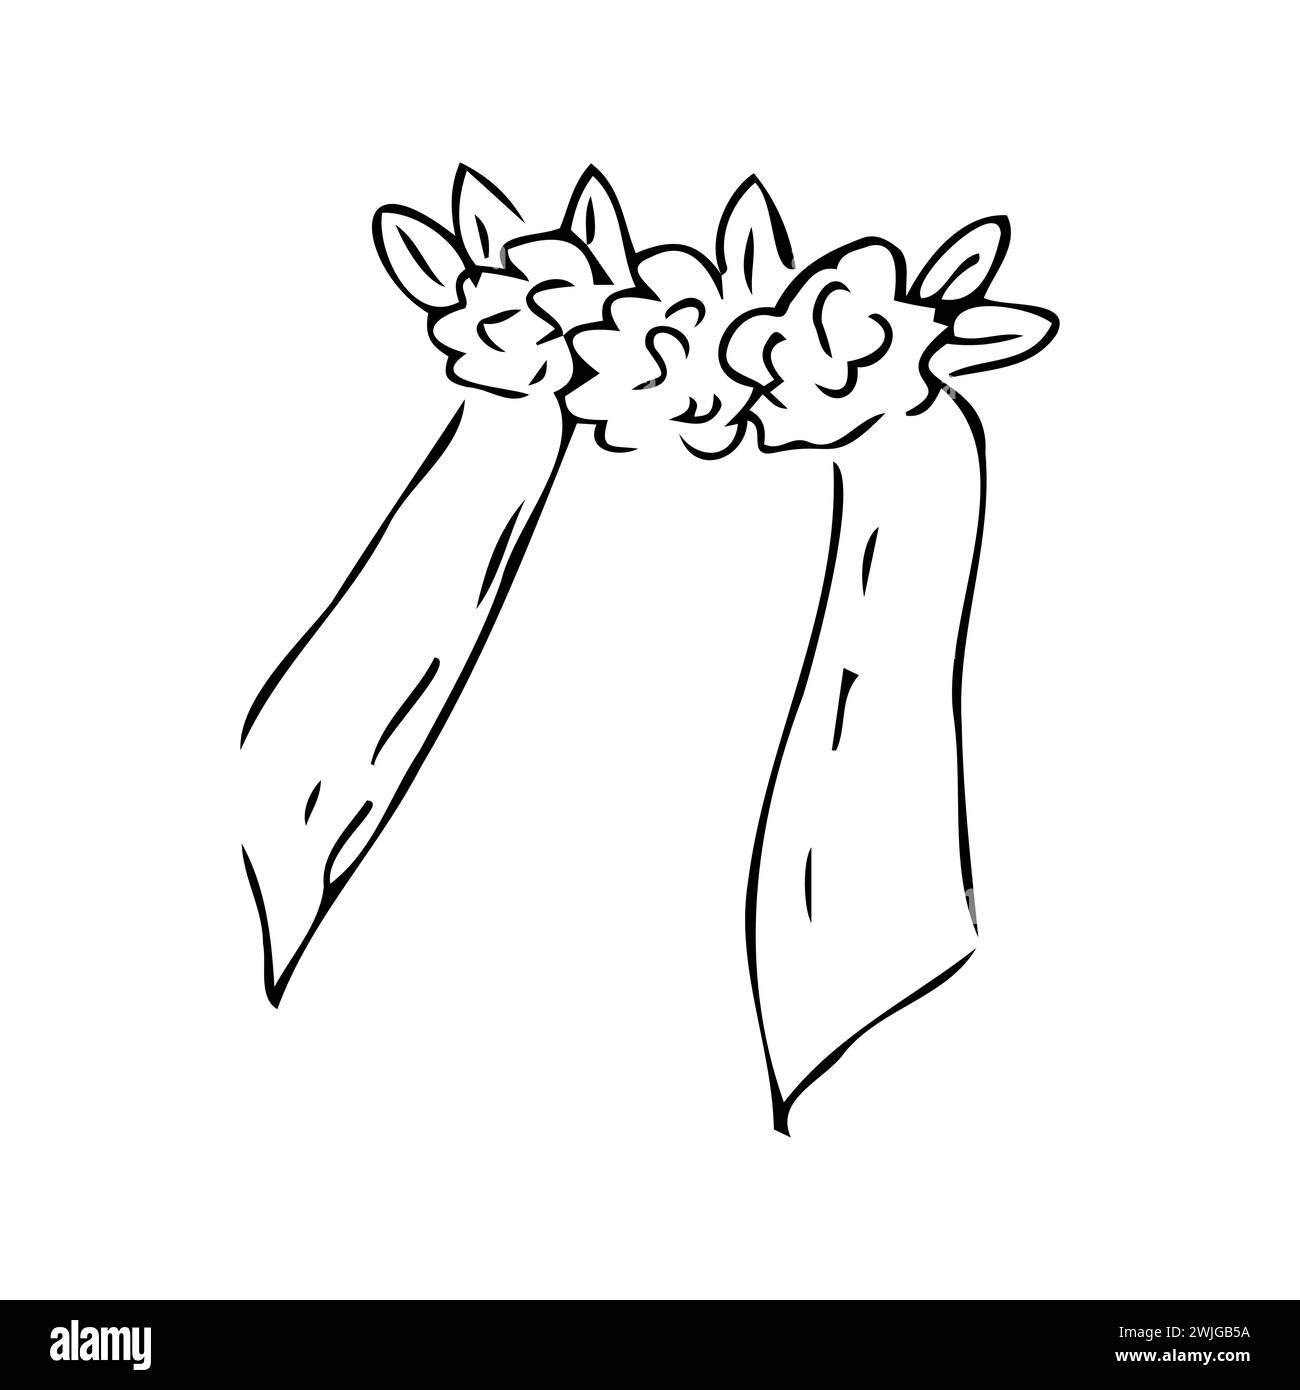 Hand drawn skech ofbride veil - vector illustration. Can used for wedding concept and design.  Stock Vector